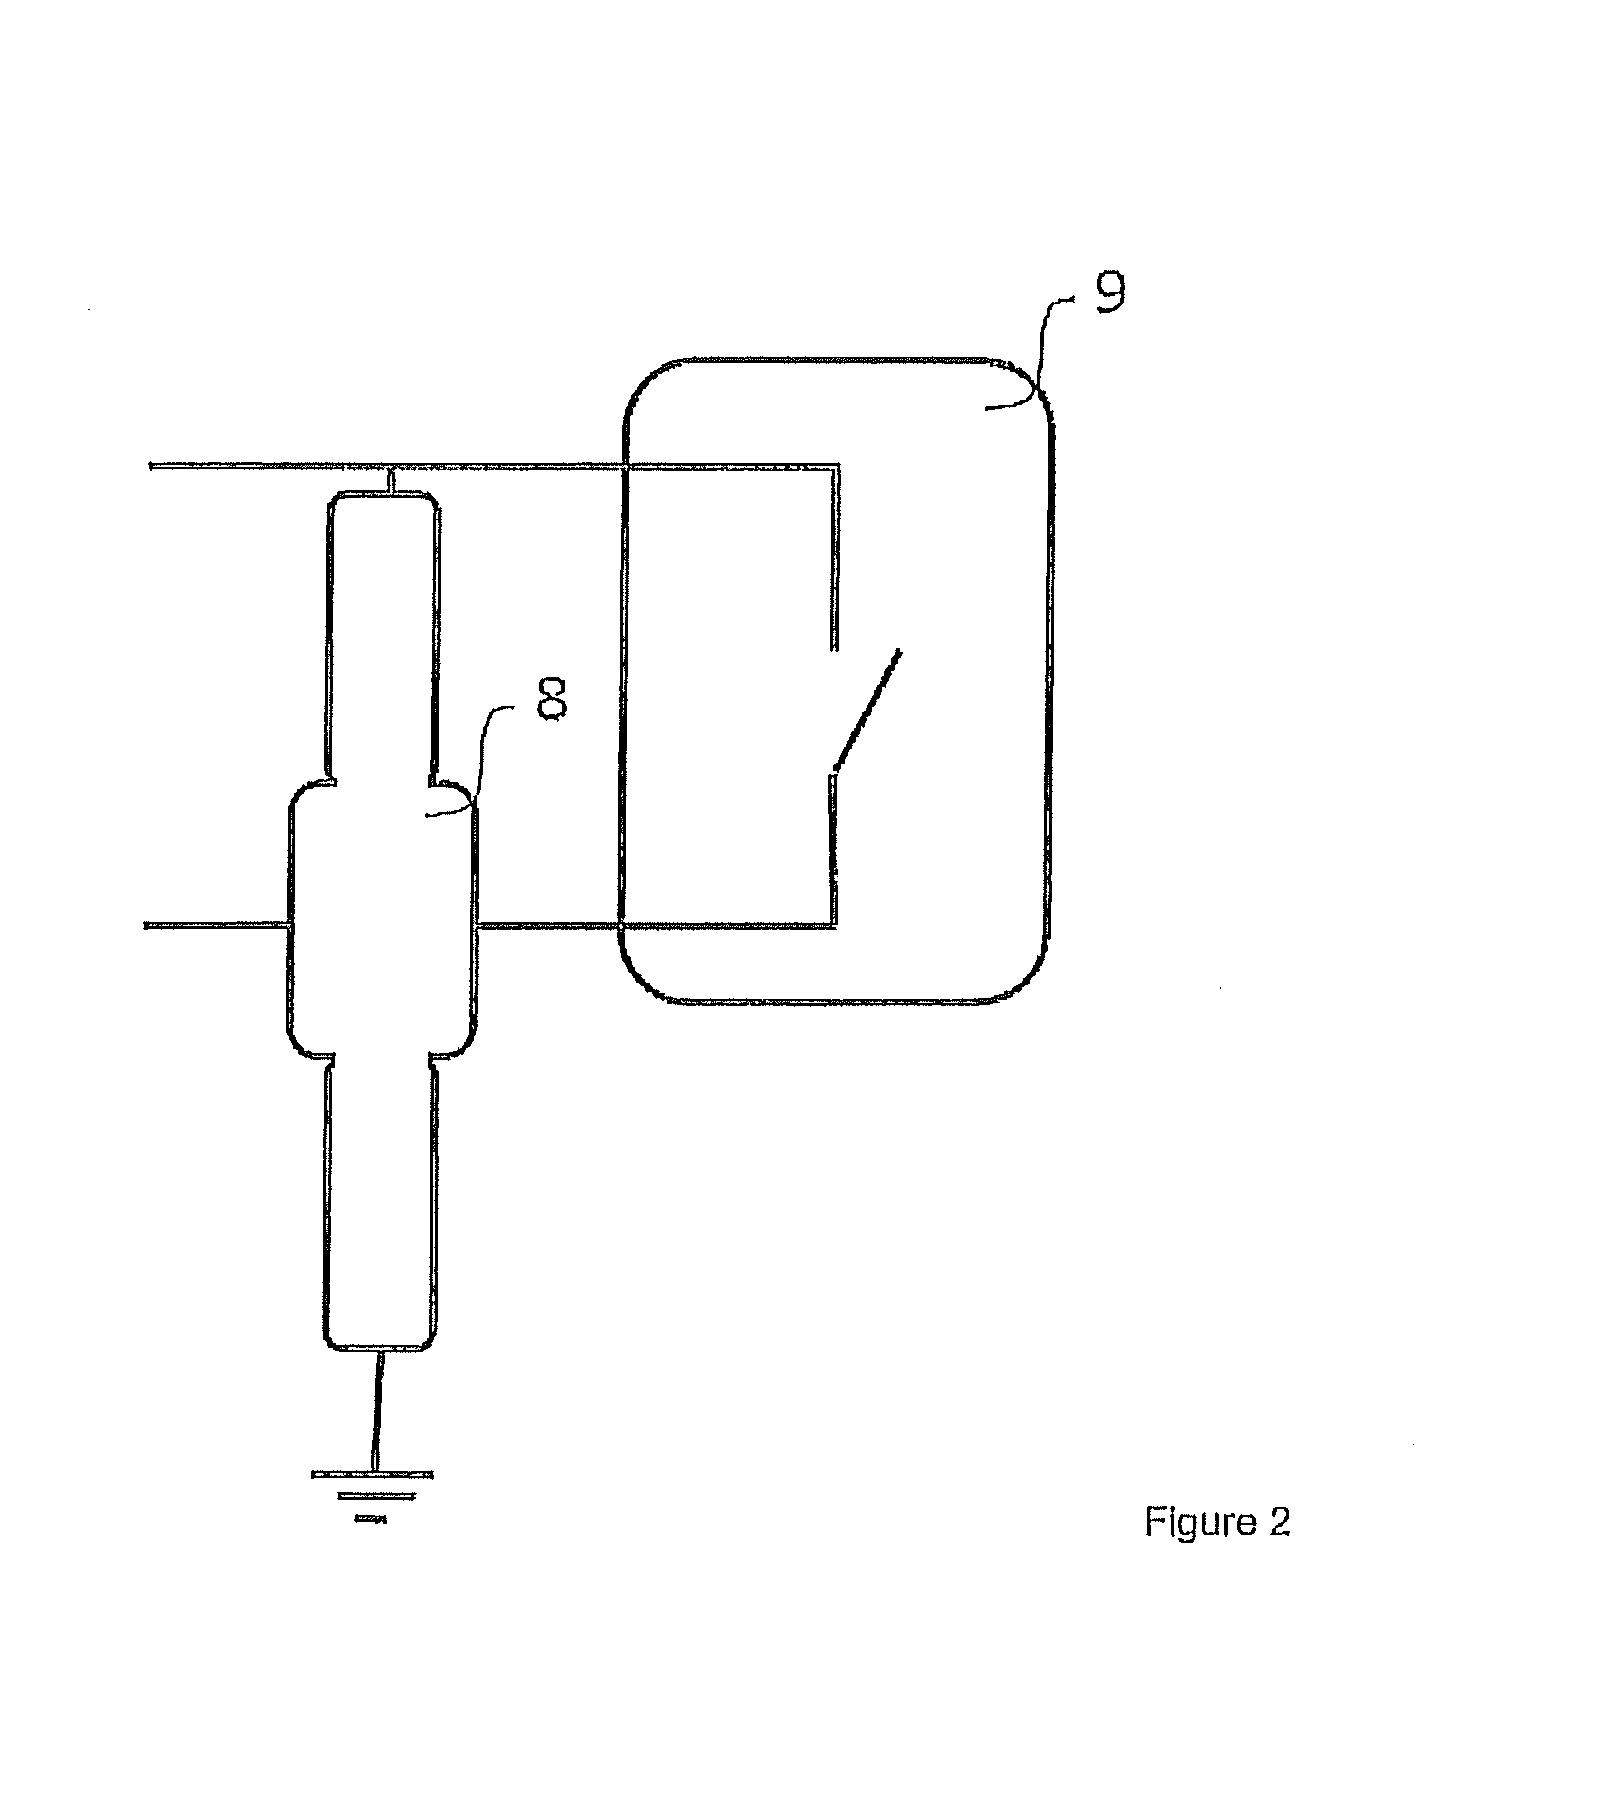 Voltage and/or current sensing device for low-, medium- or high voltage switching devices